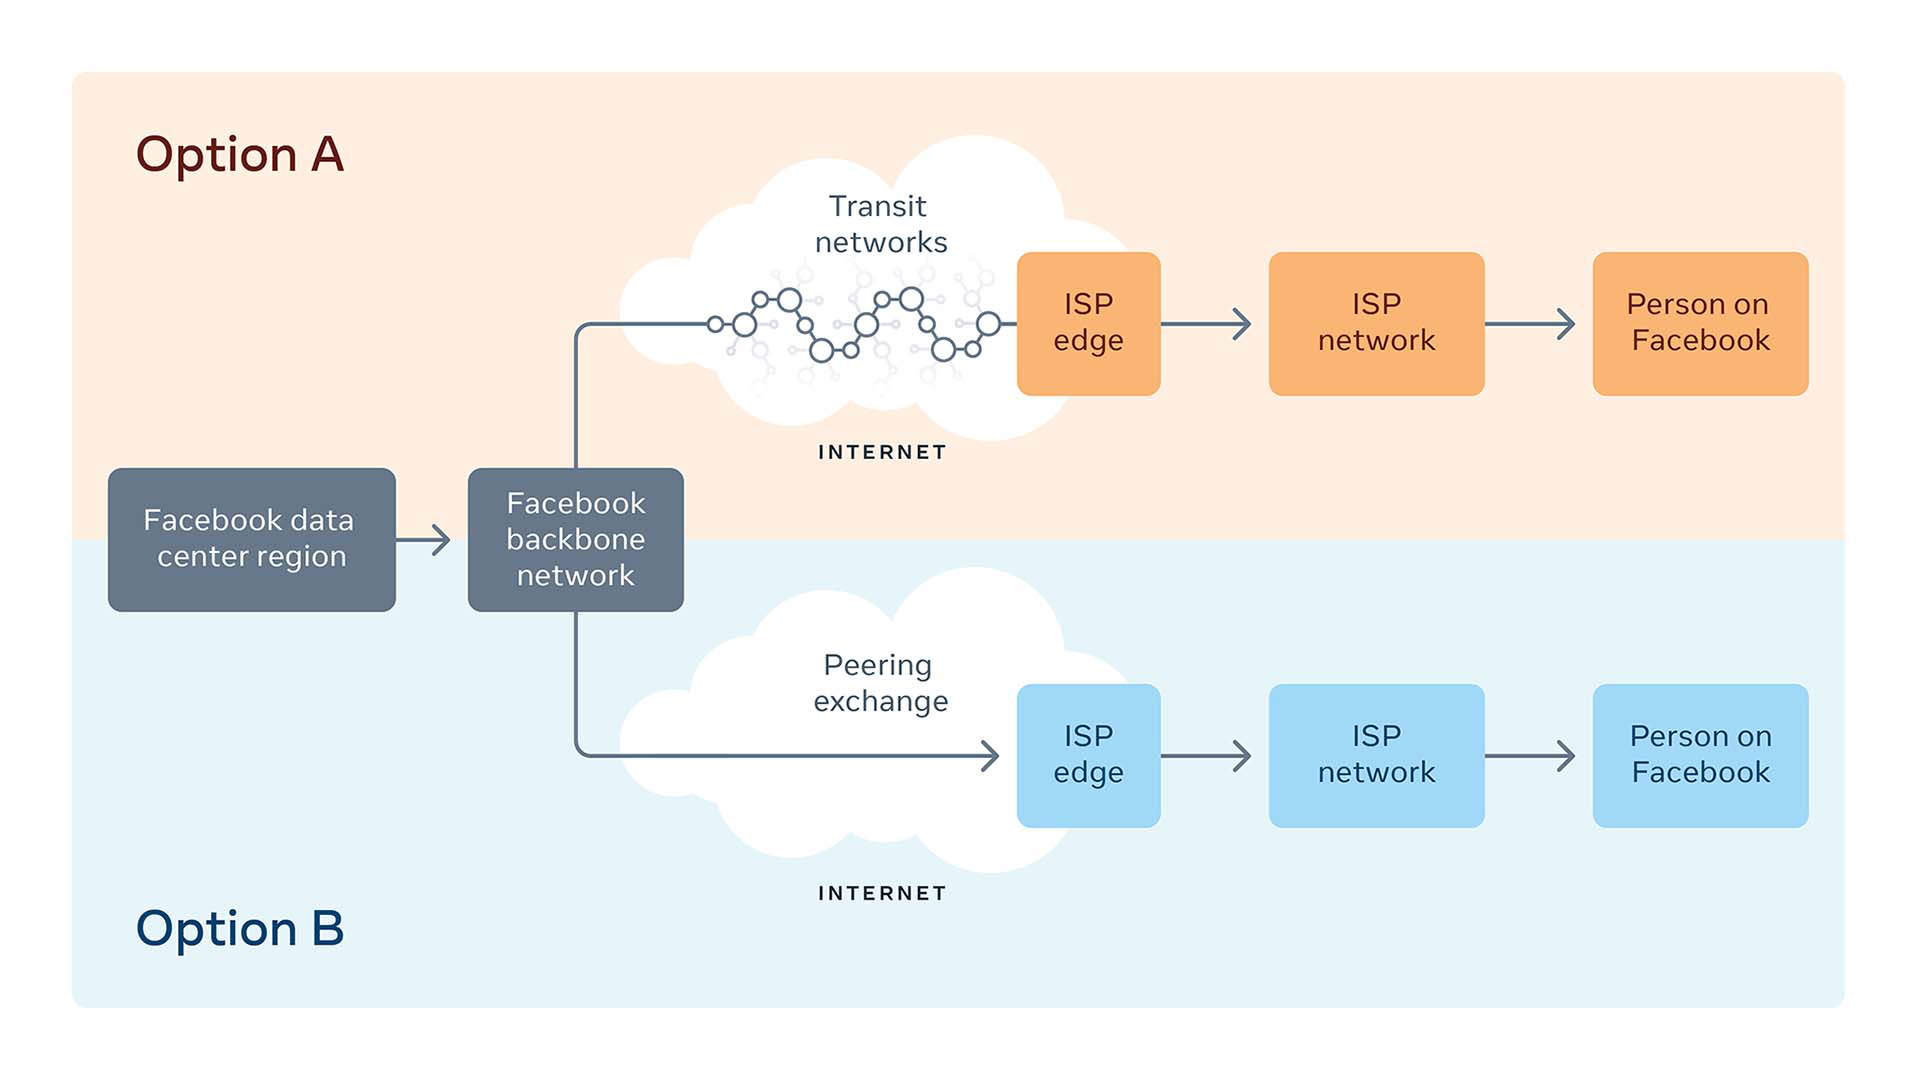 Peering automation uses the shortest path for a video before it reaches your device: